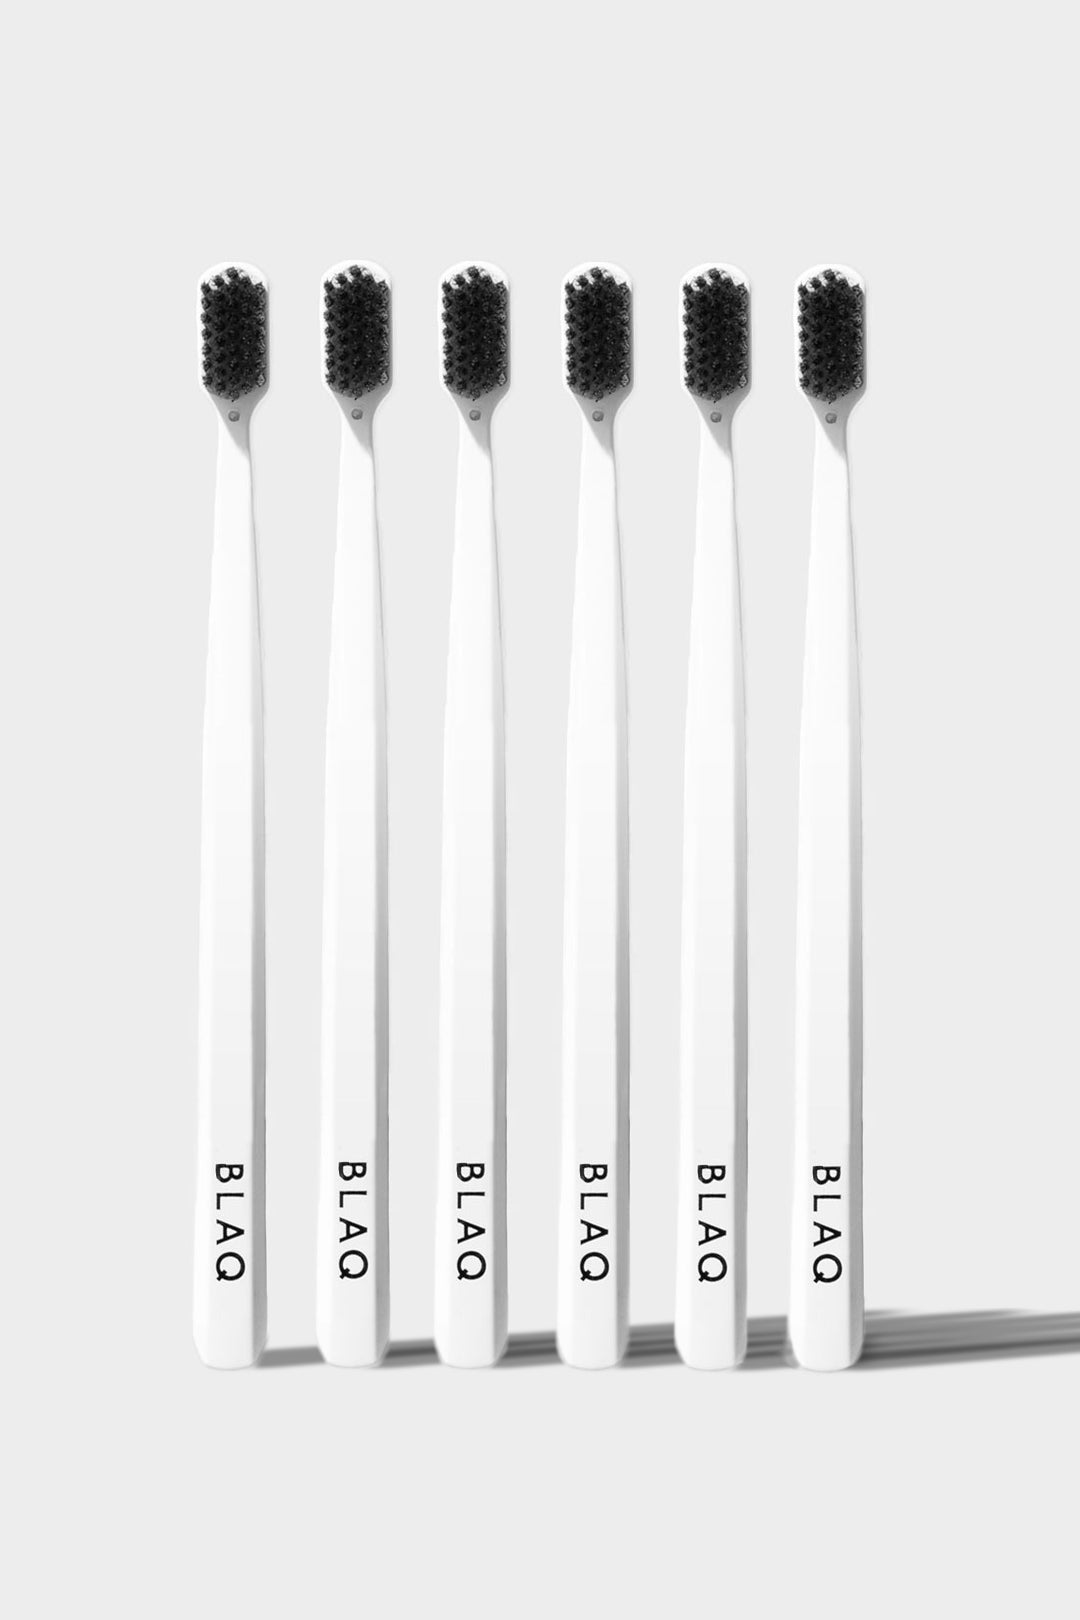 Charcoal-Infused Biodegradable Toothbrush